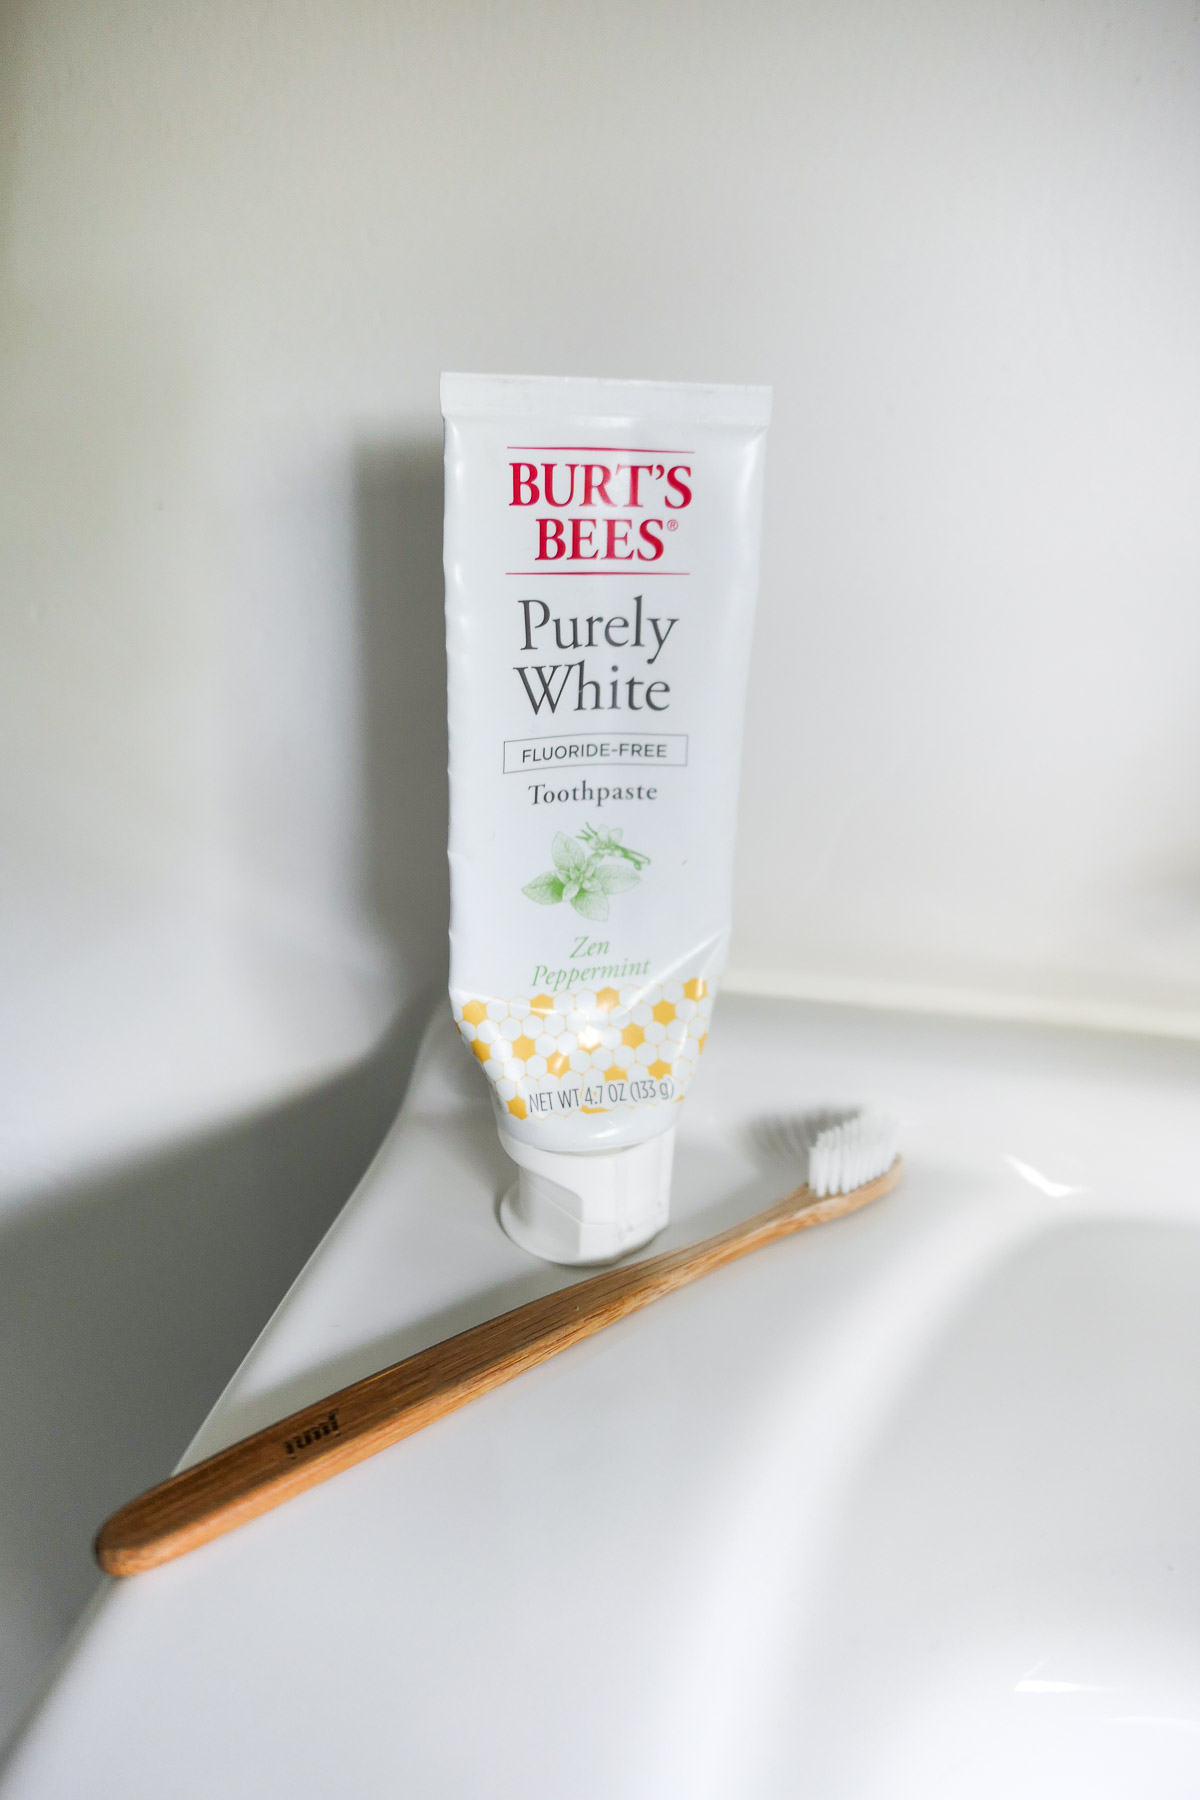 Burt's Bees Purely White Natural Toothpaste w. Toothbrush on Counter